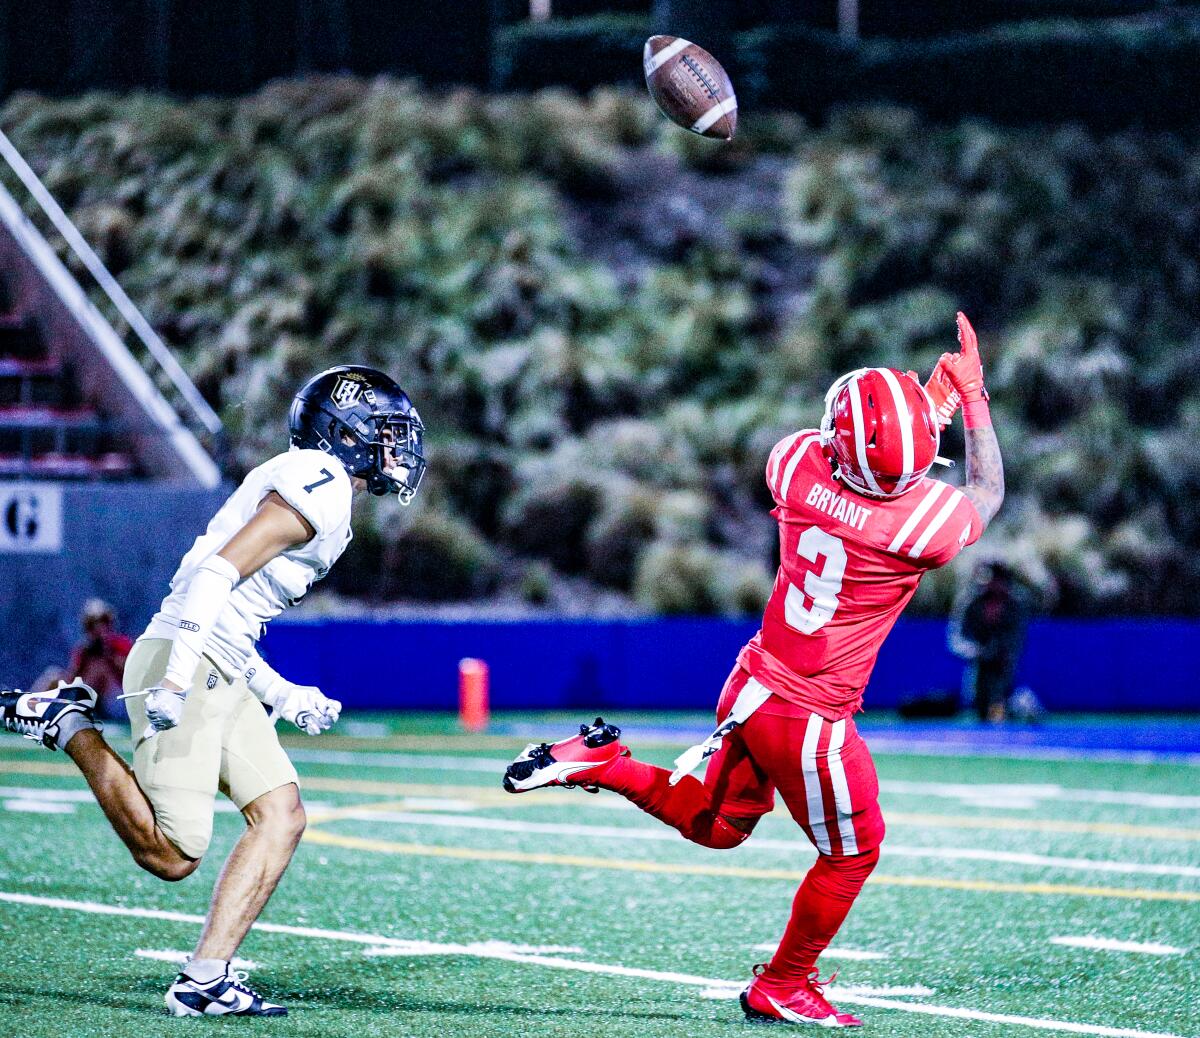 Ajon Bryant of Mater Dei makes a 40-yard reception against Servite's Sax Churchwell on Friday night.